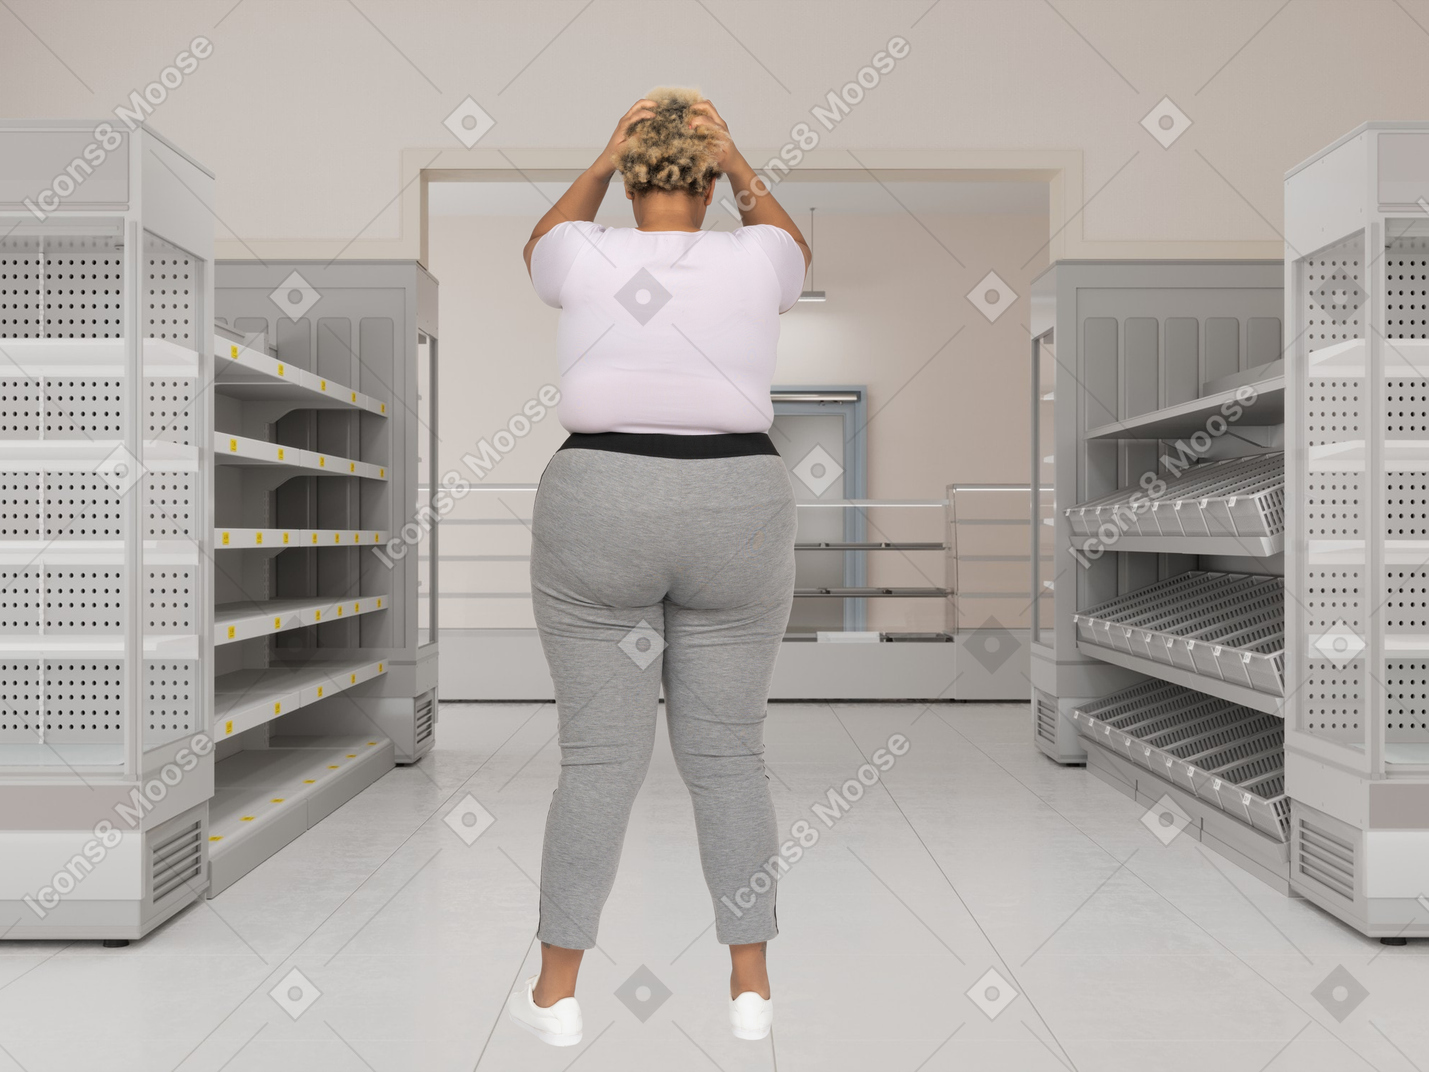 Back view of a woman holding her head and standing in front of a row of empty shelves